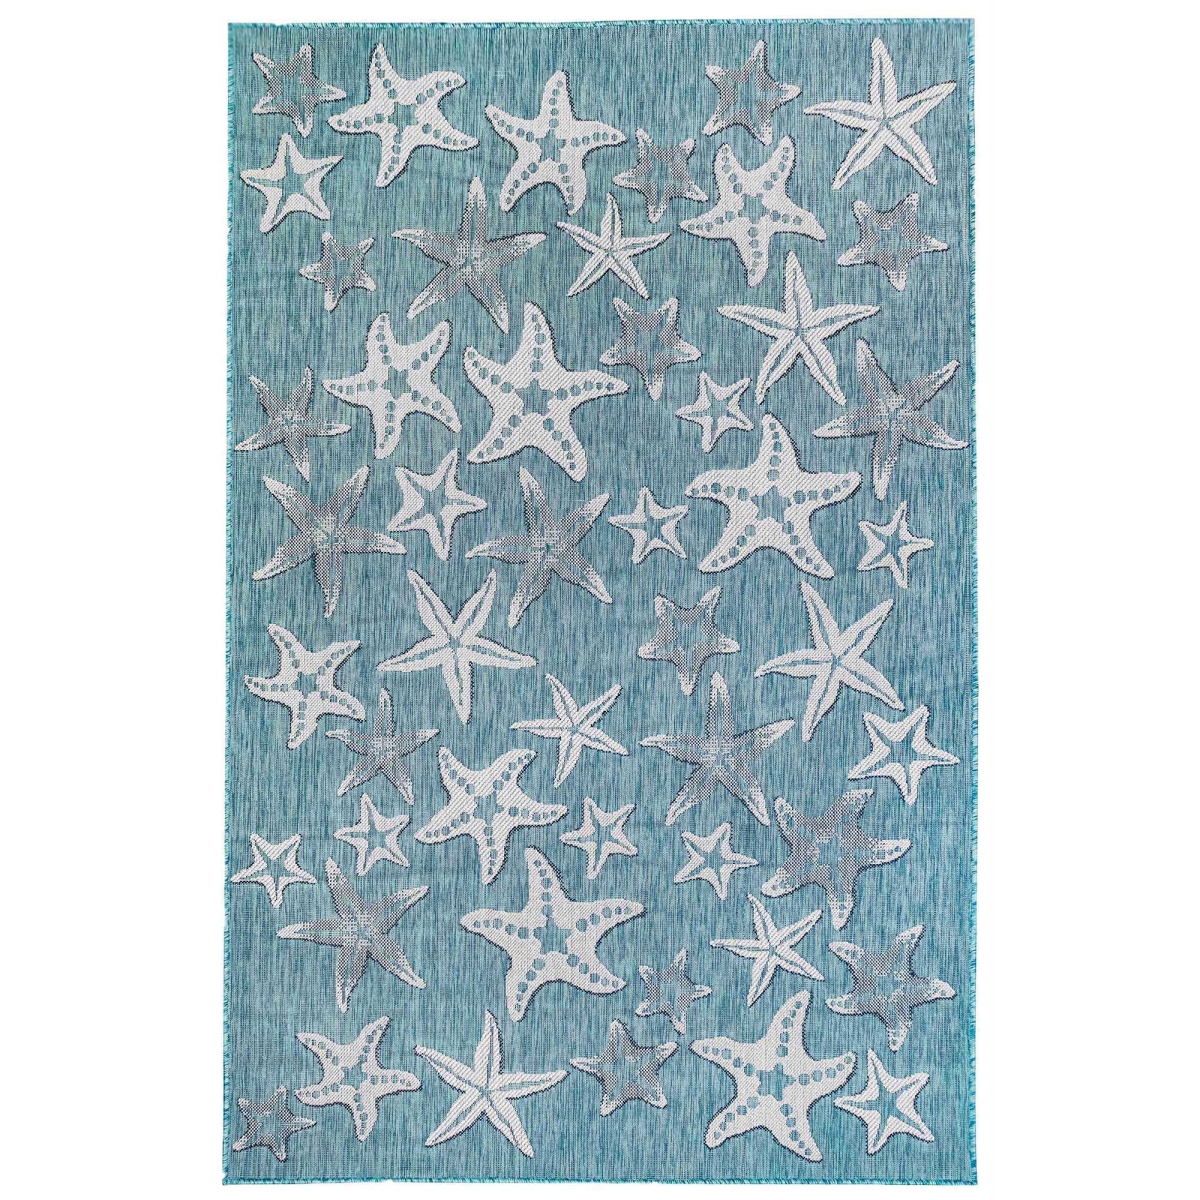 Trans-ocean Imports Cre80841504 7 Ft. 10 In. X 9 Ft. 10 In. Liora Manne Carmel Starfish Indoor & Outdoor Wilton Woven Rectangle Rug - Aqua